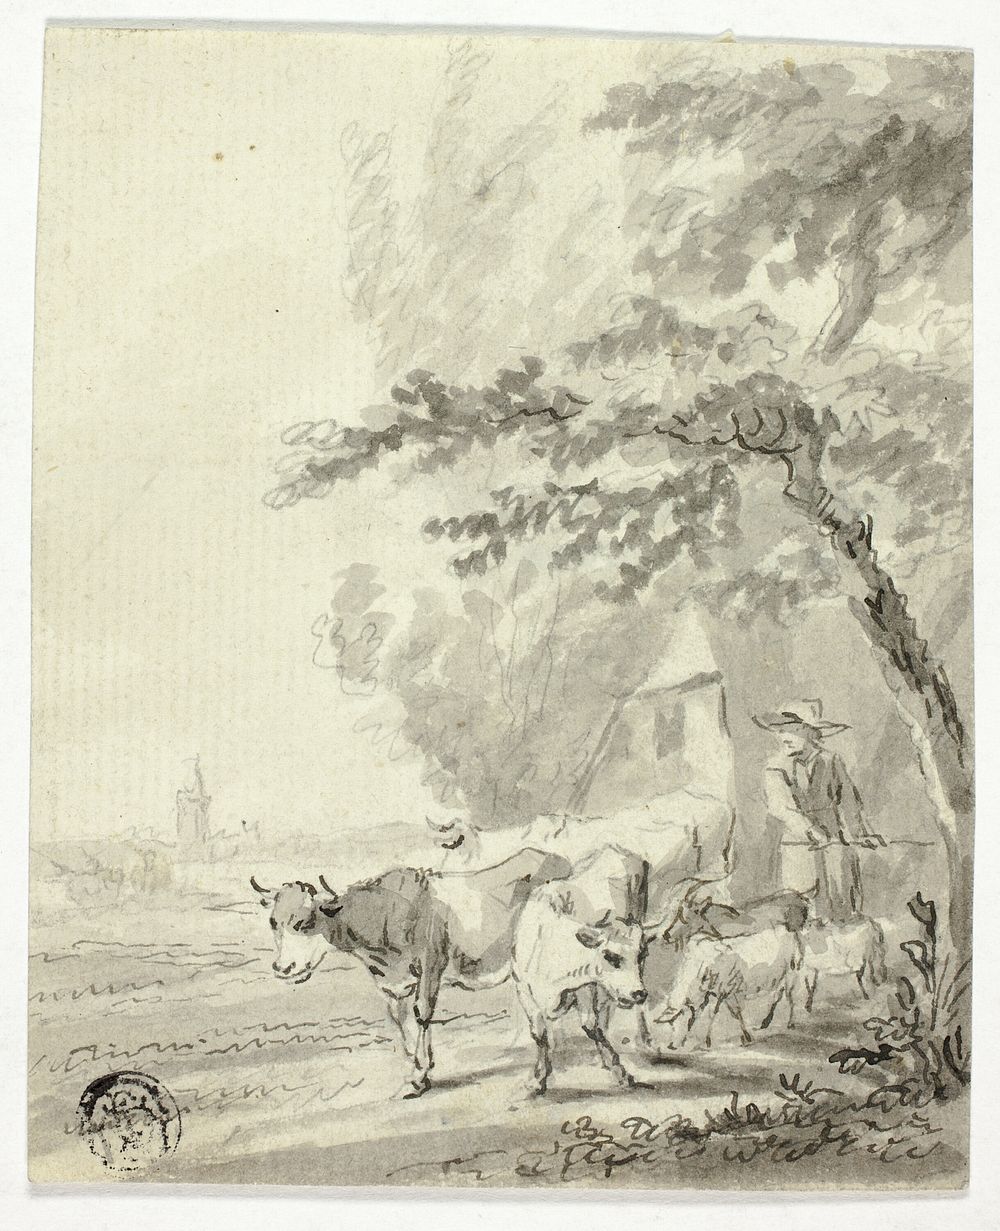 Man Herding Cows and Sheep by Nicolaes Berchem